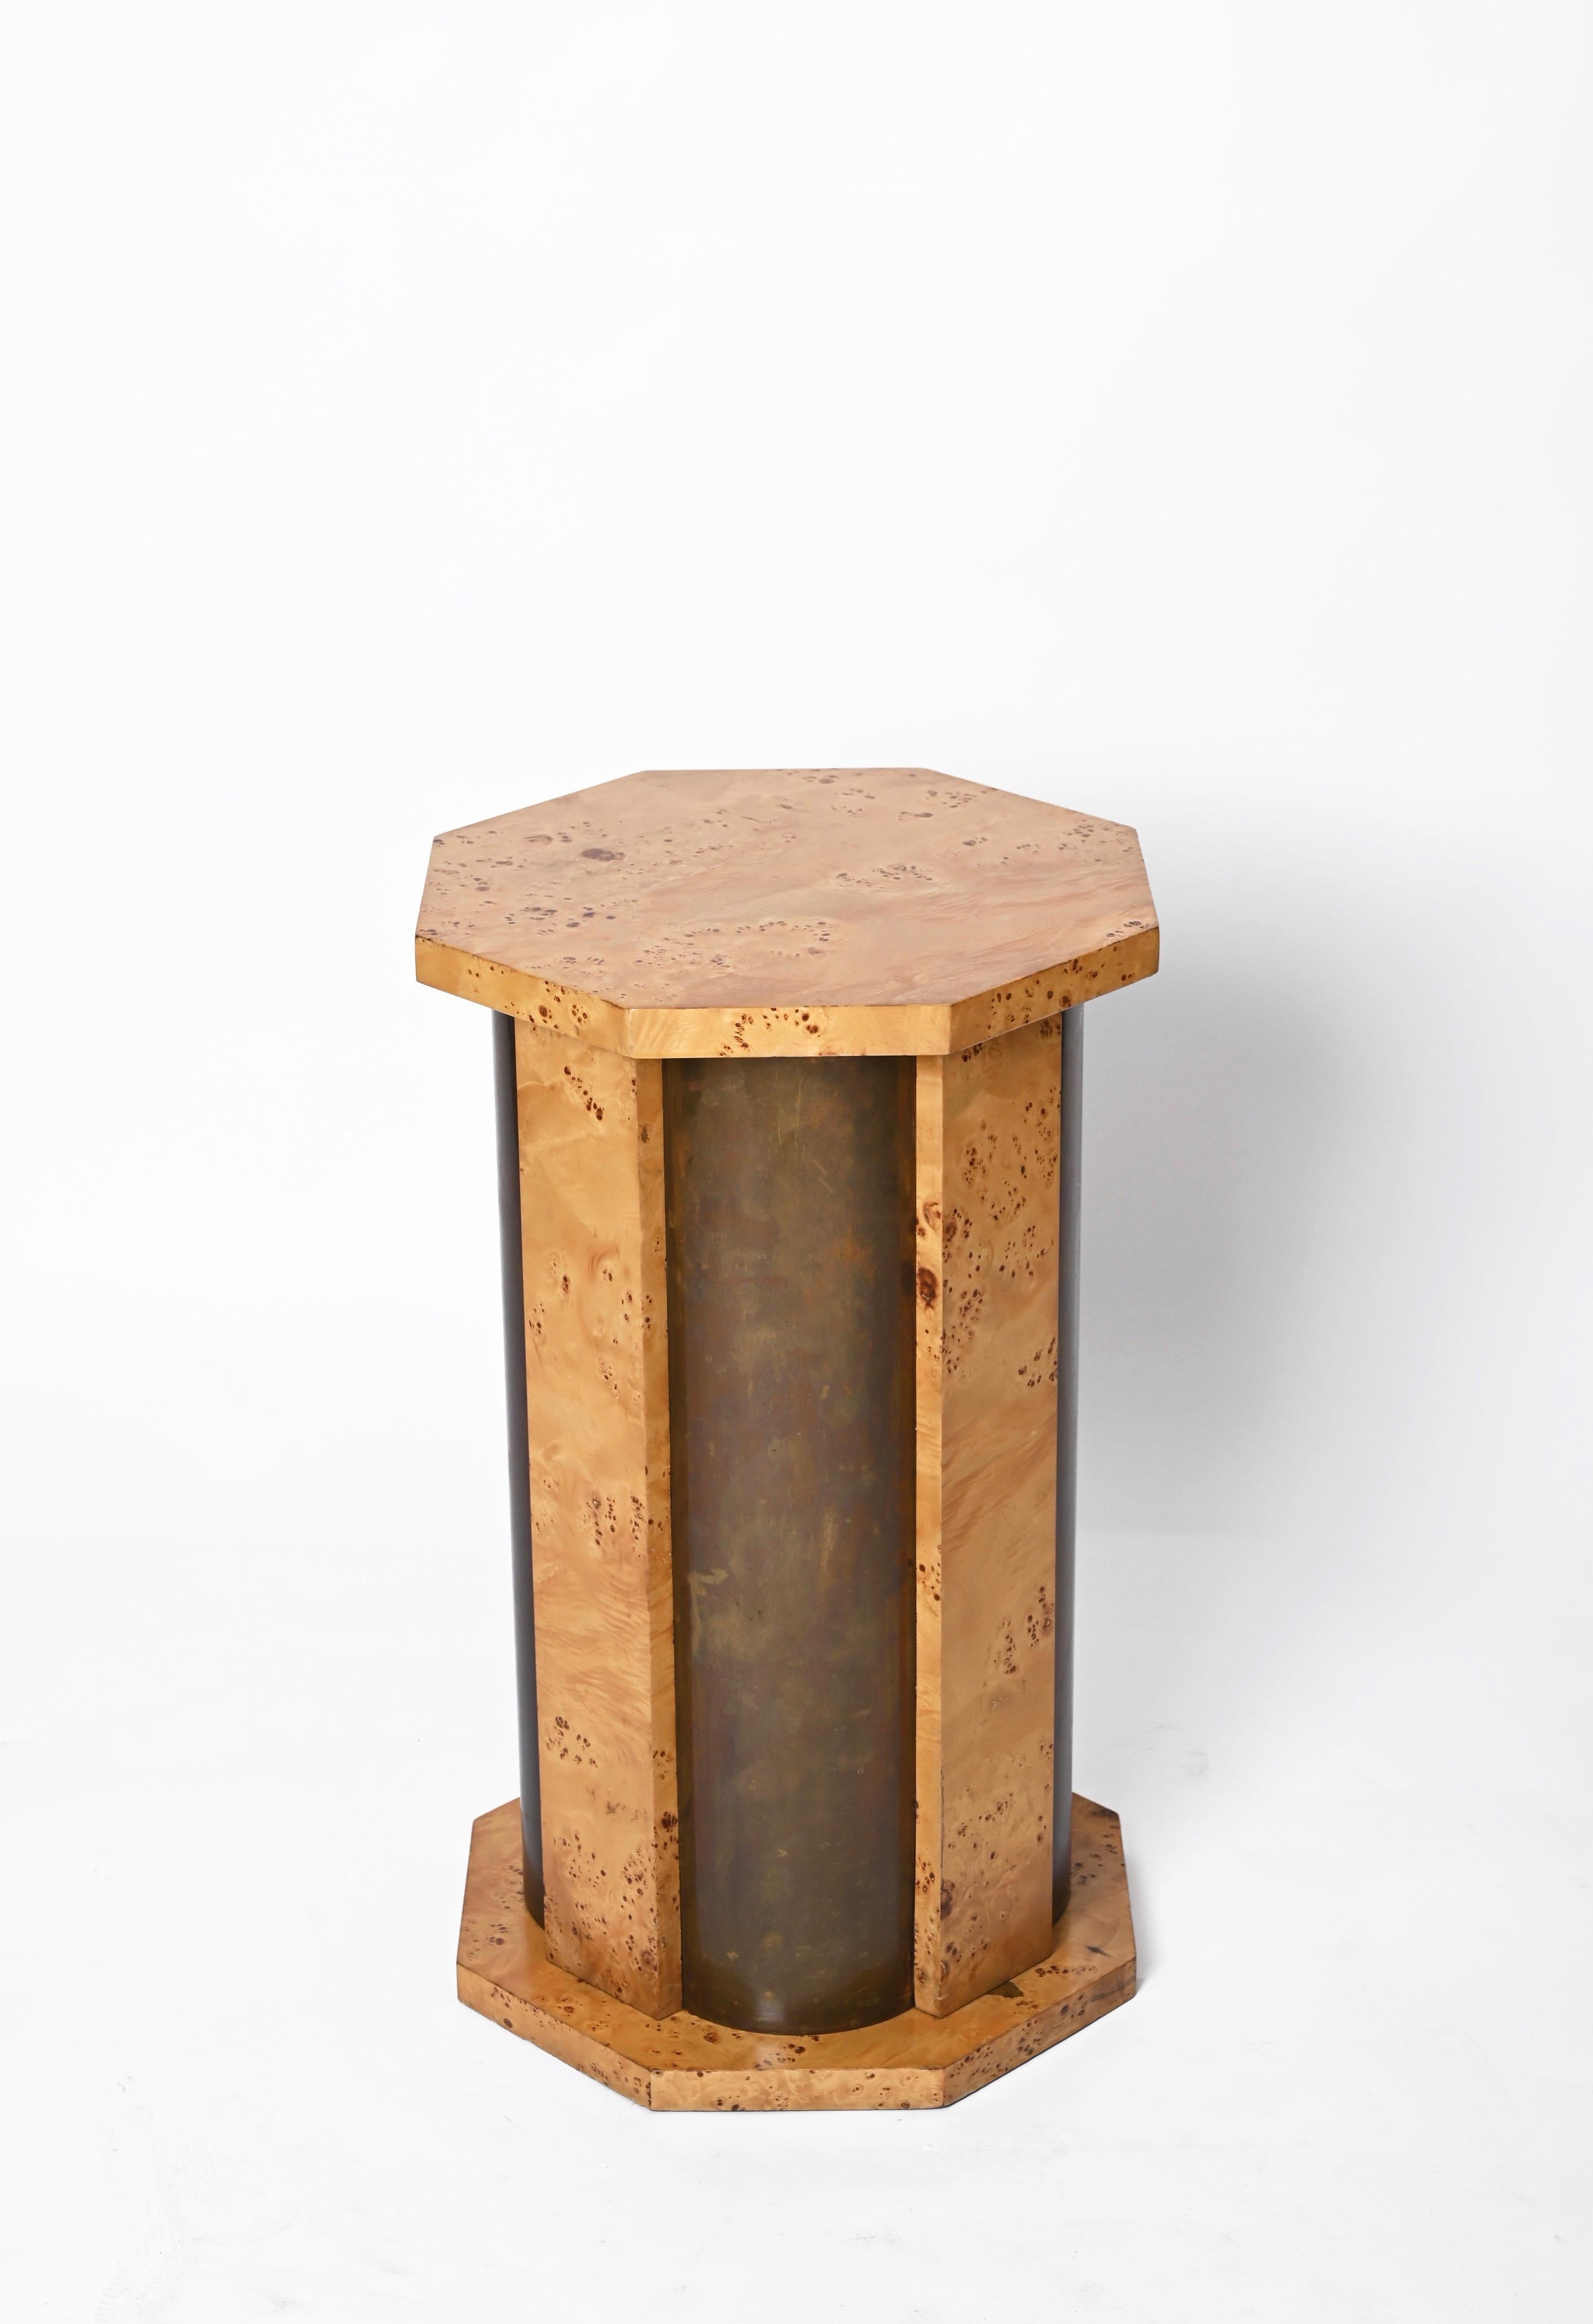 Tommaso Barbi Octagonal Table Pedestal in Burl Wood and Brass, Italy, 1970 For Sale 5